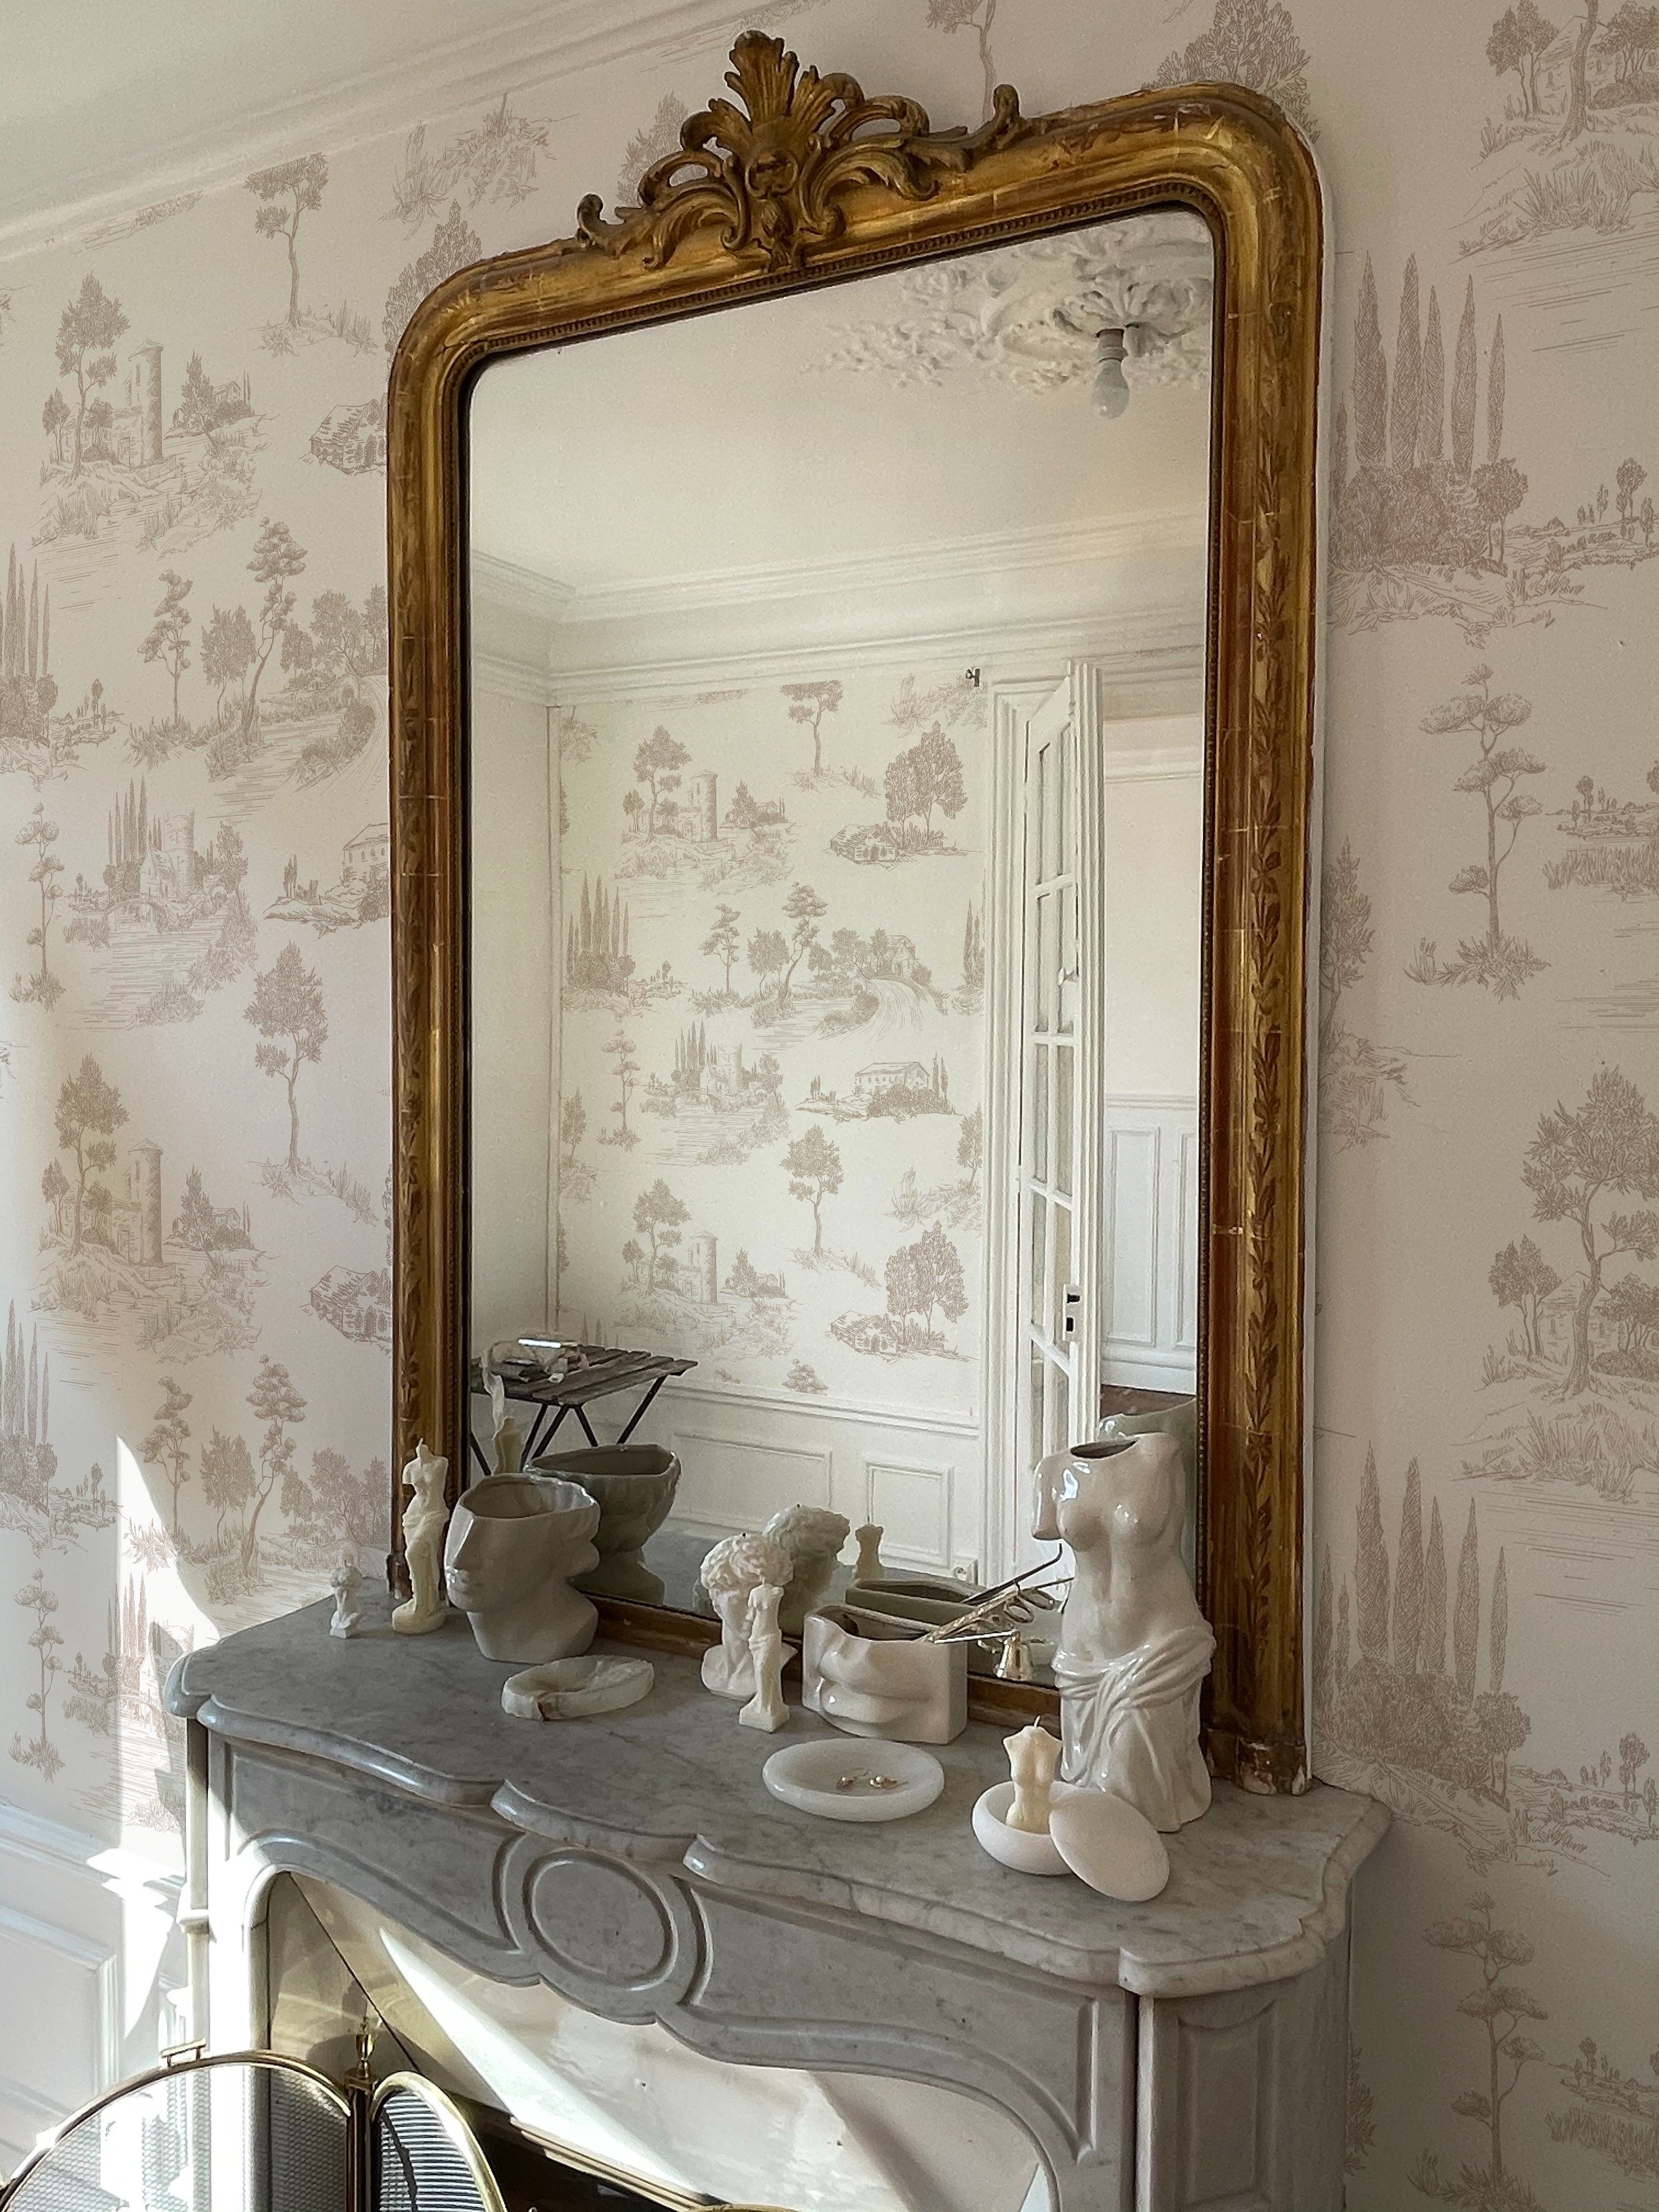 An elegant interior showcasing the Farmhouse Toile Wallpaper on the wall behind an ornate golden-framed mirror, sitting above a marble fireplace adorned with sculptural art pieces, reflecting the wallpaper's classic design and creating a sophisticated vintage aesthetic.